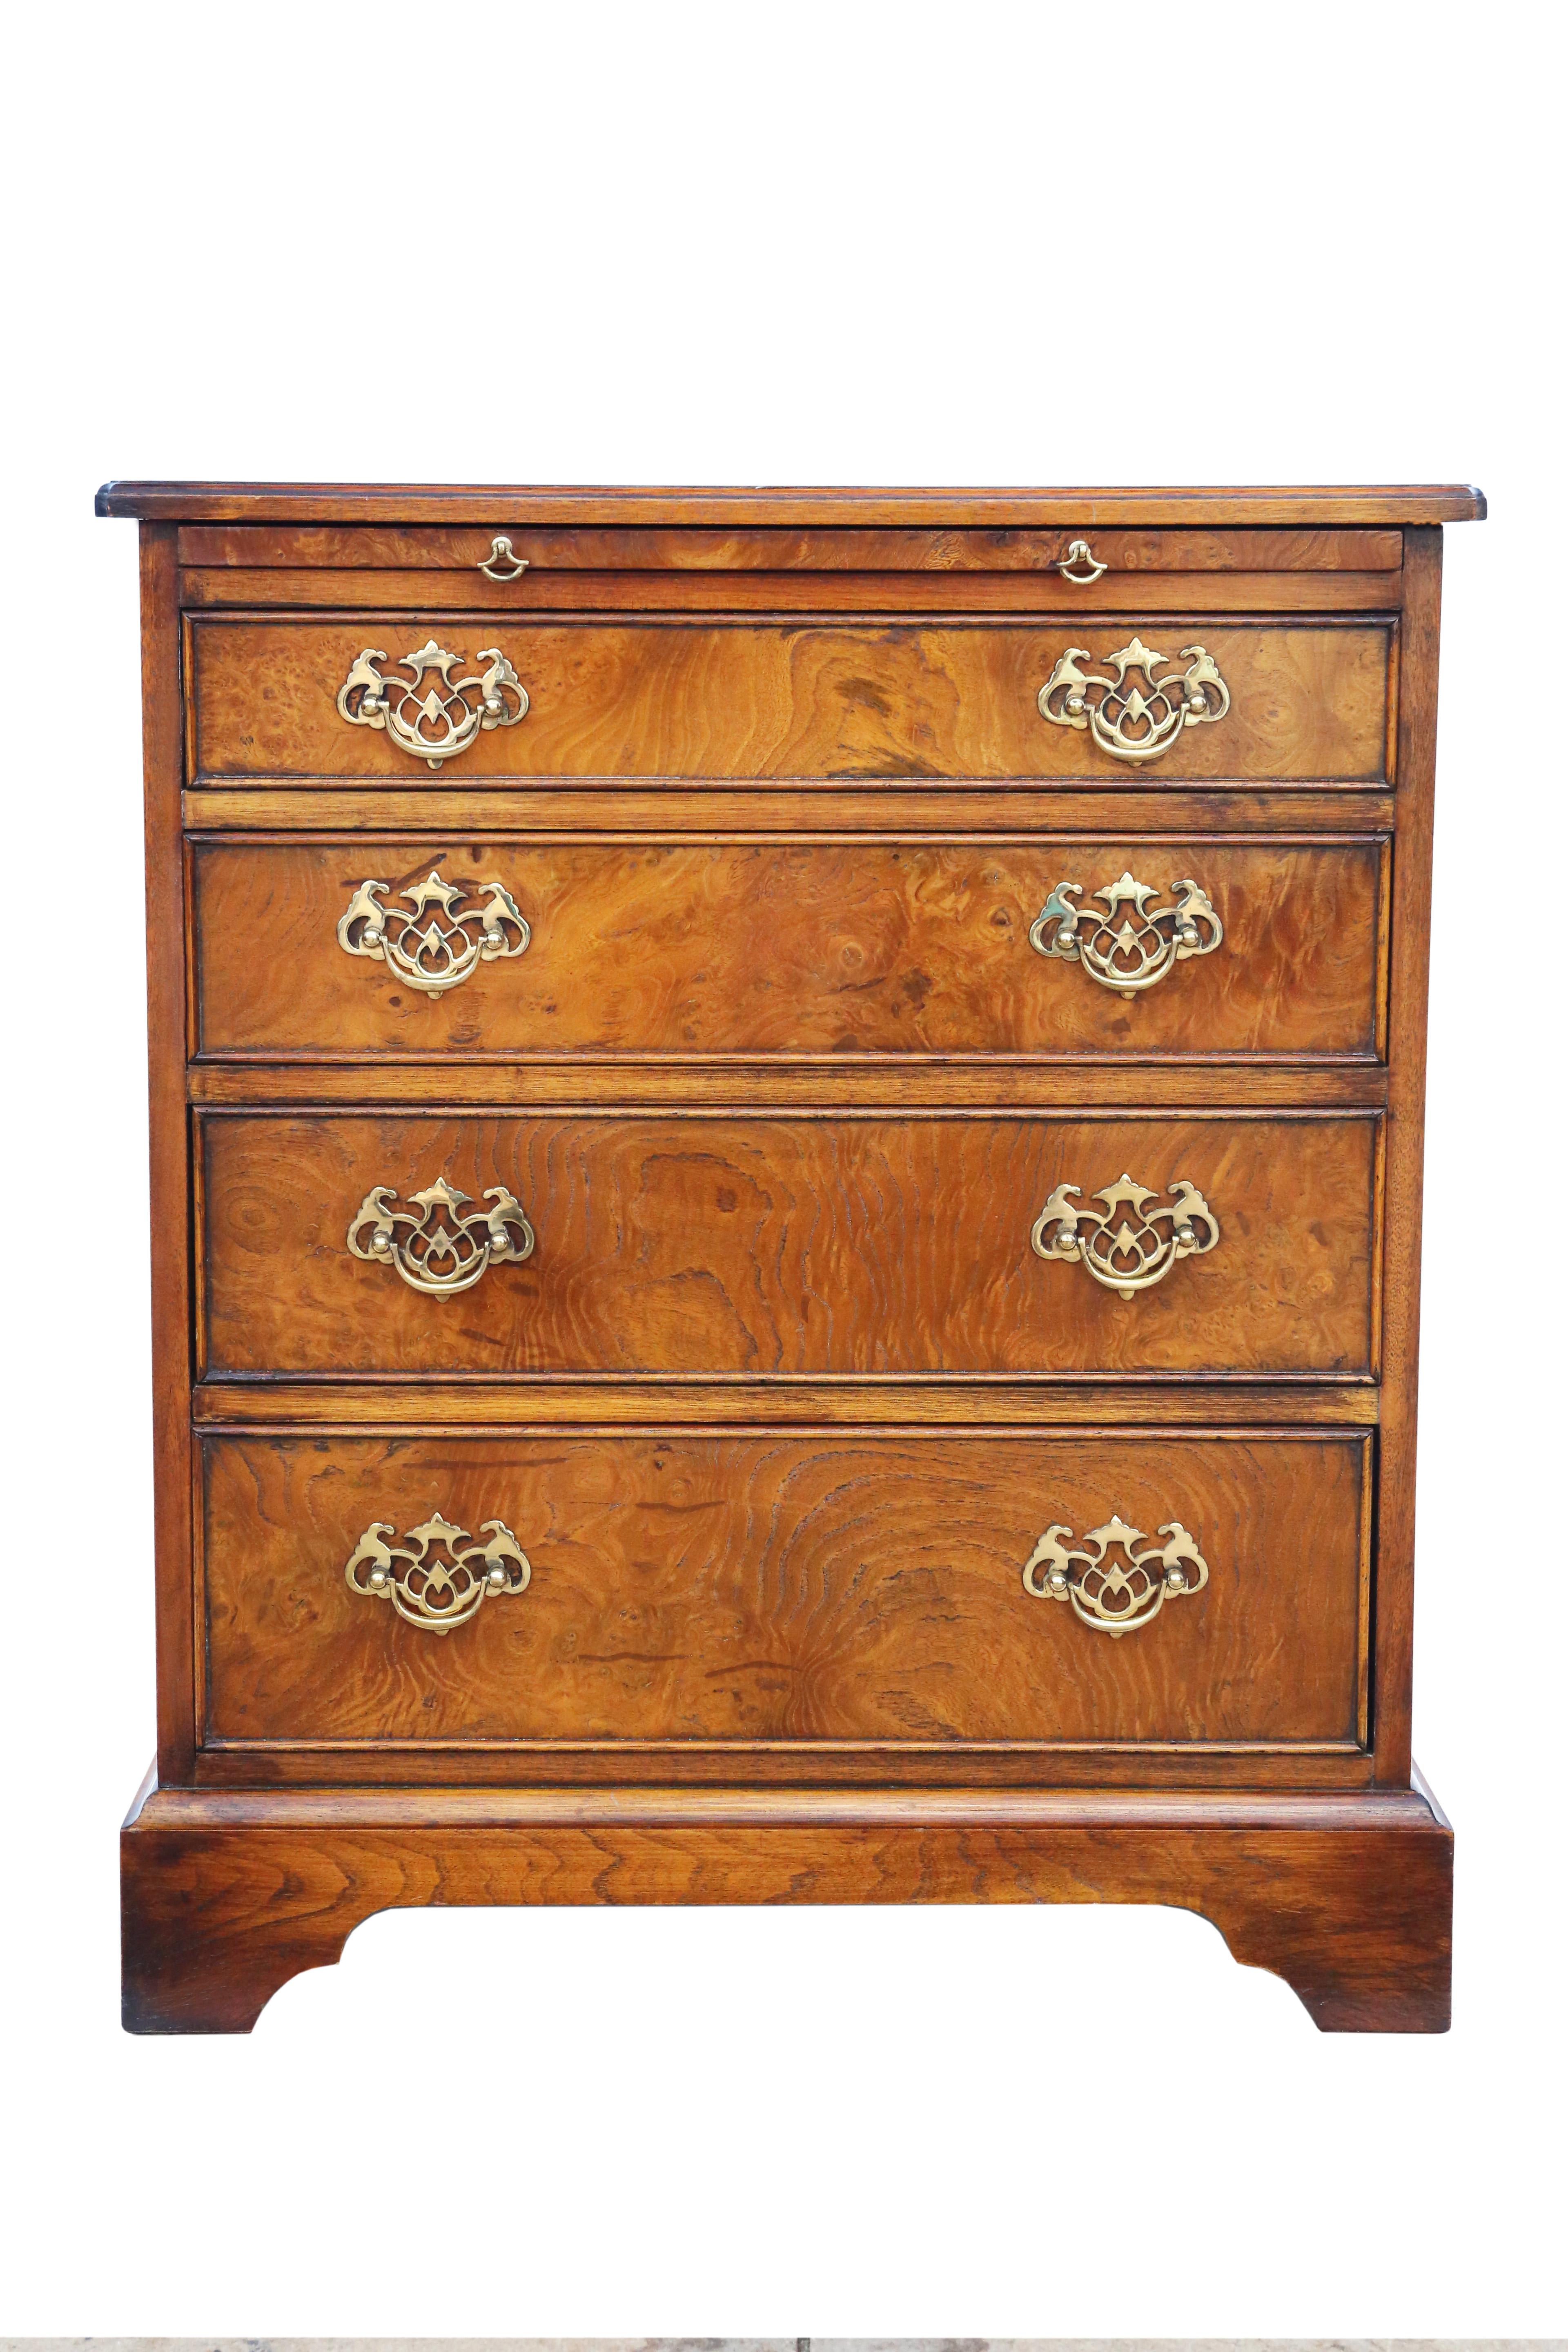 Antique vintage small Georgian revival burr yew chest of drawers. Around 40 years old. Lovely compact proportions.

Great rare decorative item, which has no loose joints and no woodworm.

Good colour and patina. The drawers slide freely.

66W x